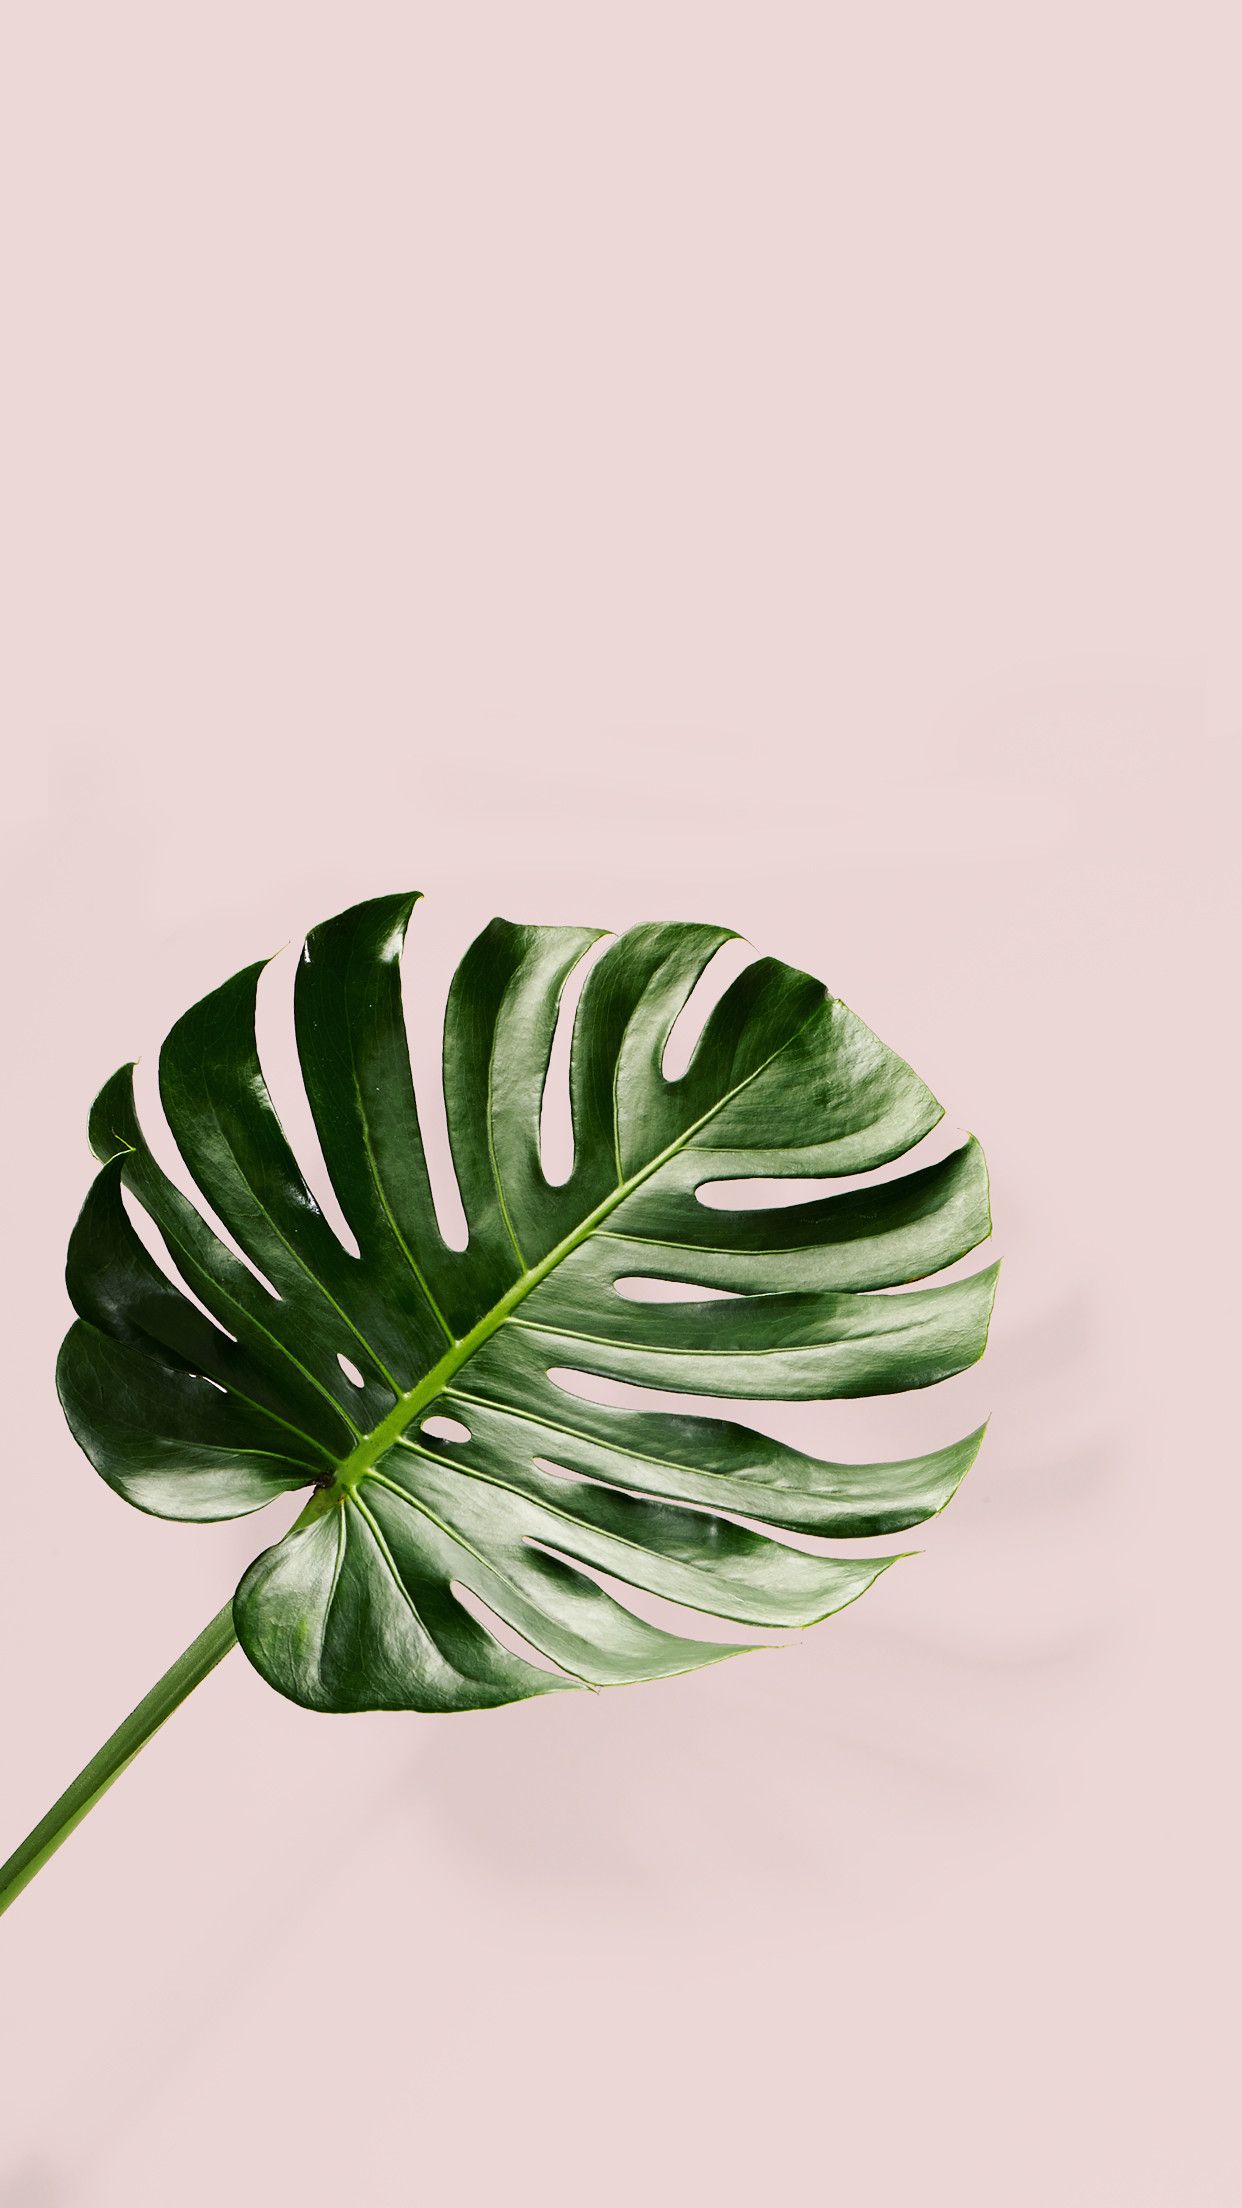 A single green leaf of a monstera plant against a pale pink background - Plants, tropical, Monstera